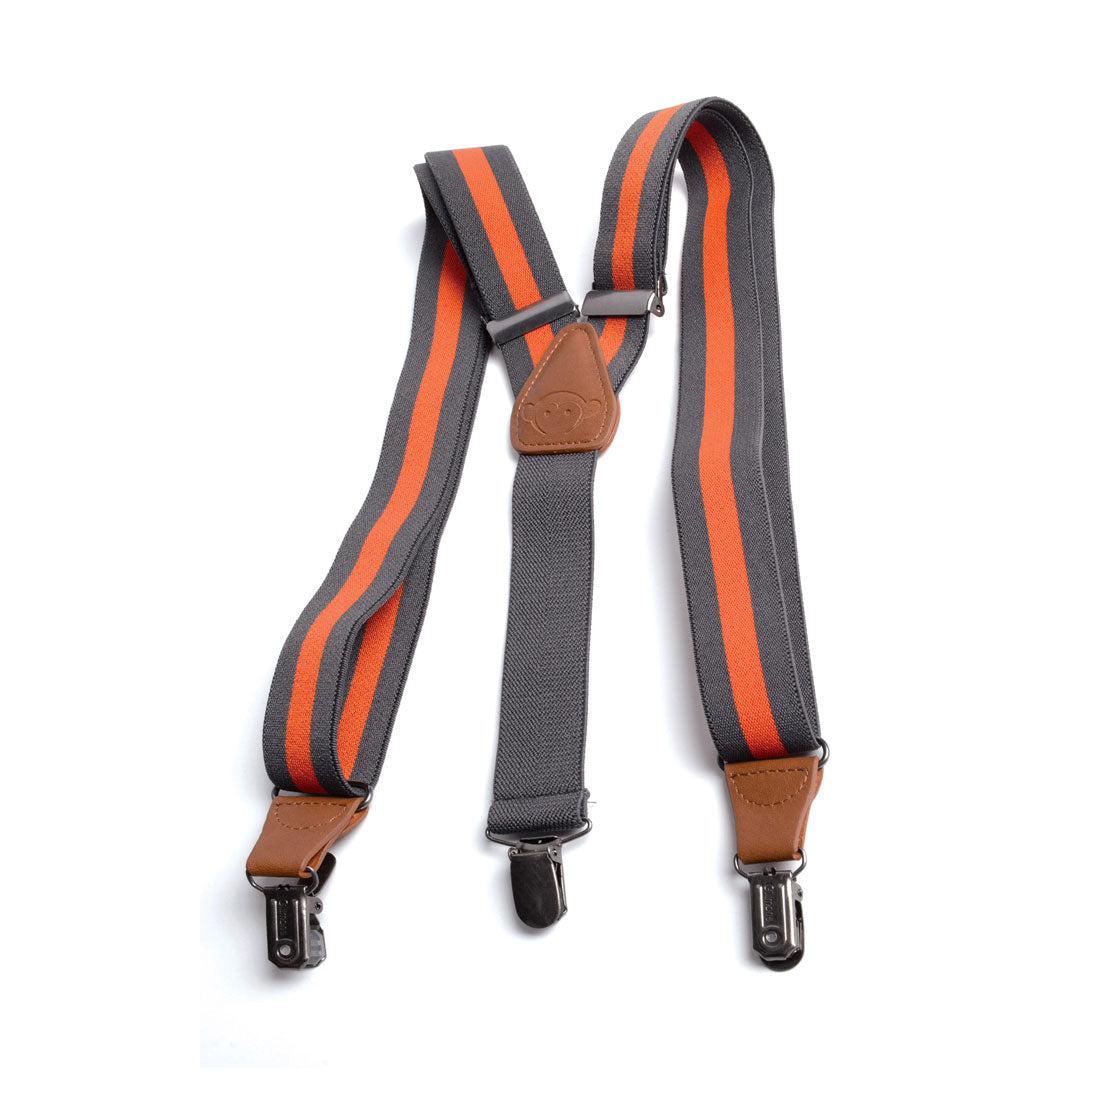 Boys' Striped Suspenders by Appaman